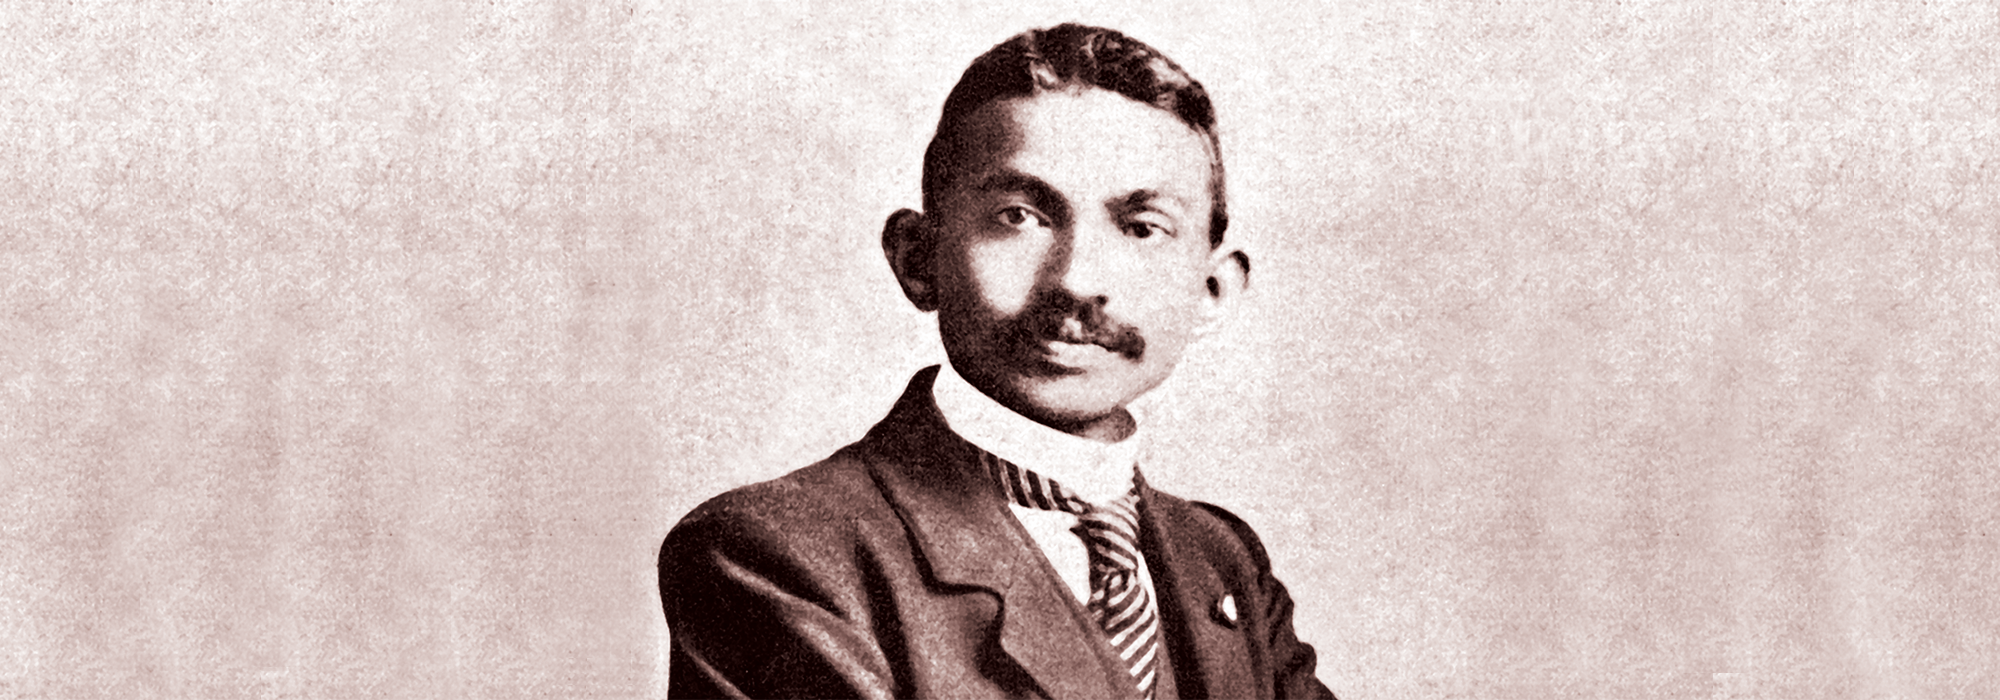 Gandhi at age 35 in South Africa